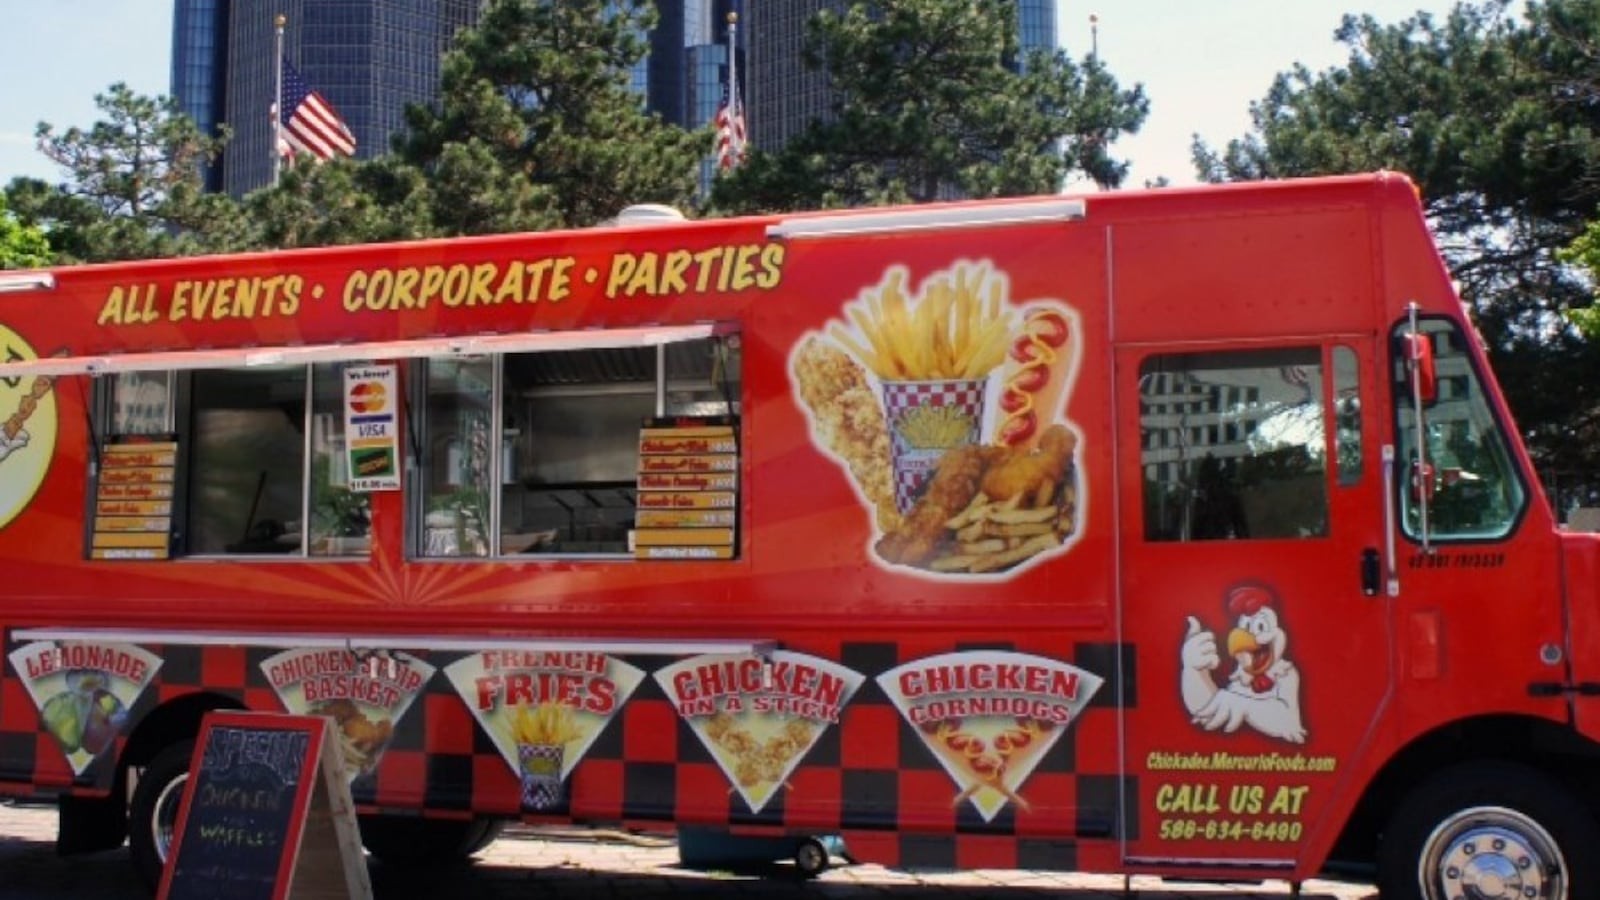 The Detroit Public Schools Community District plans to purchase two food trucks like the one shown in this stock image of Detroit.